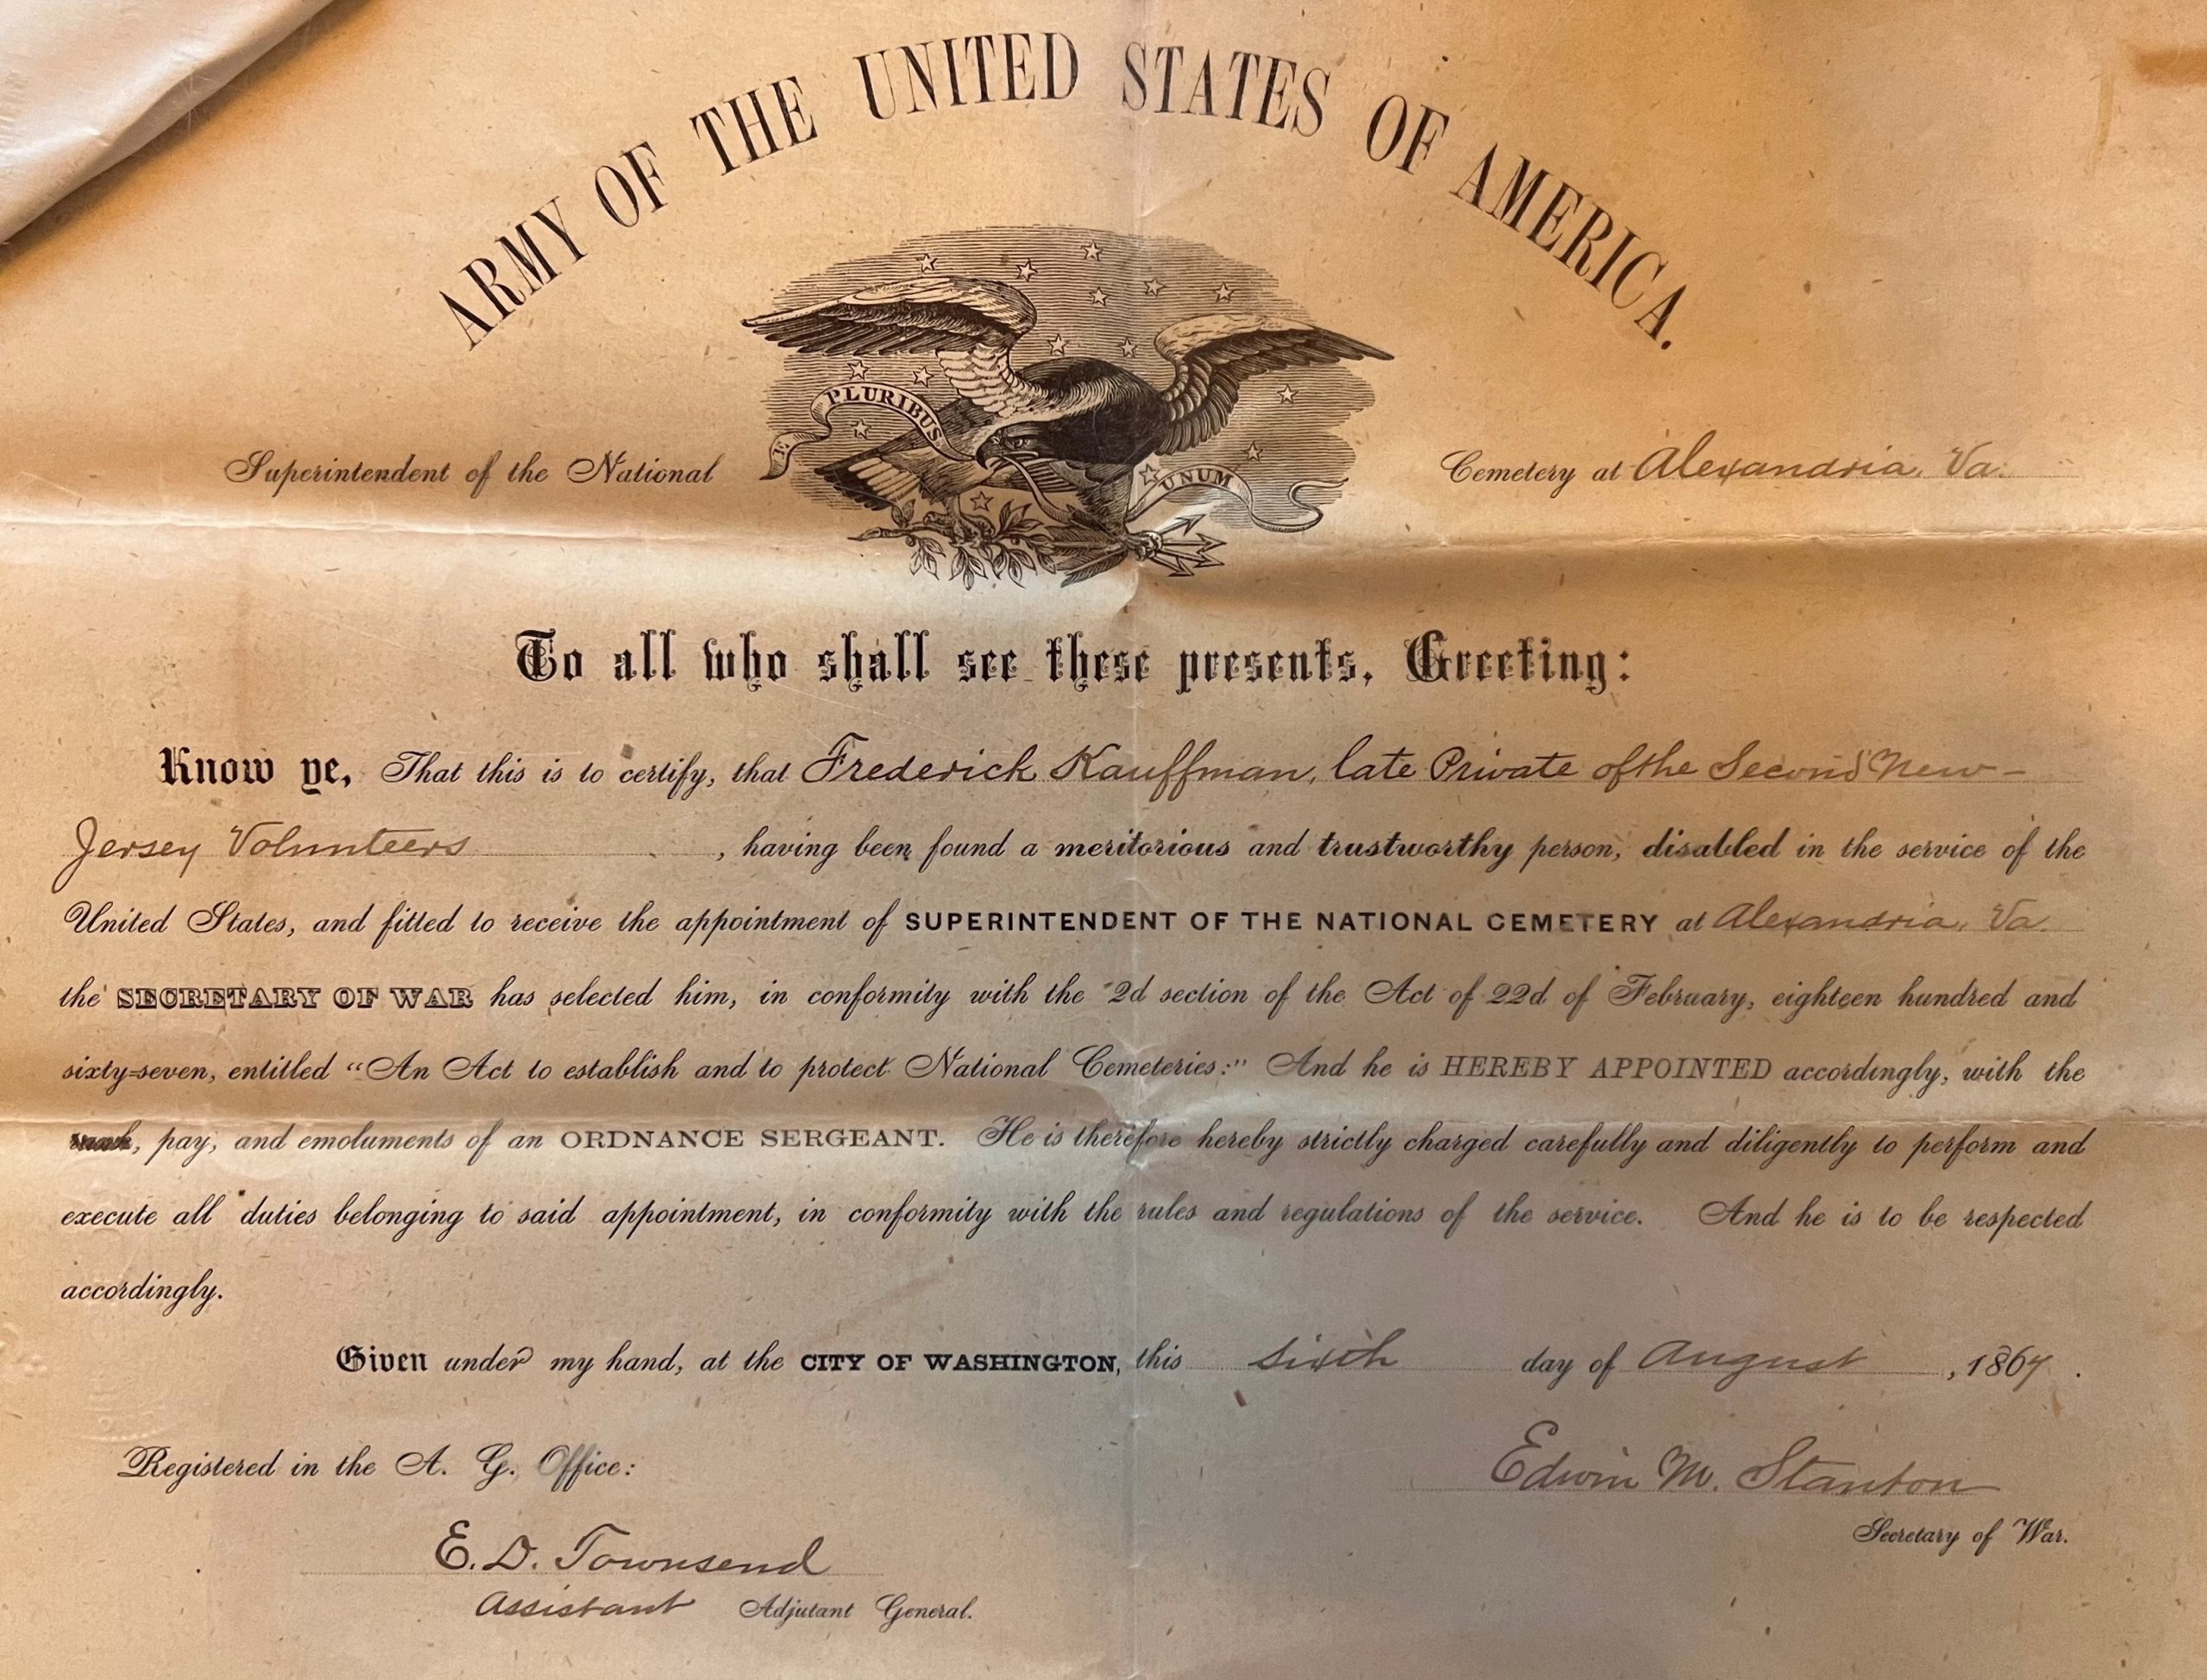 Certificate issued in 1867 by the Army to Frederick Kauffman